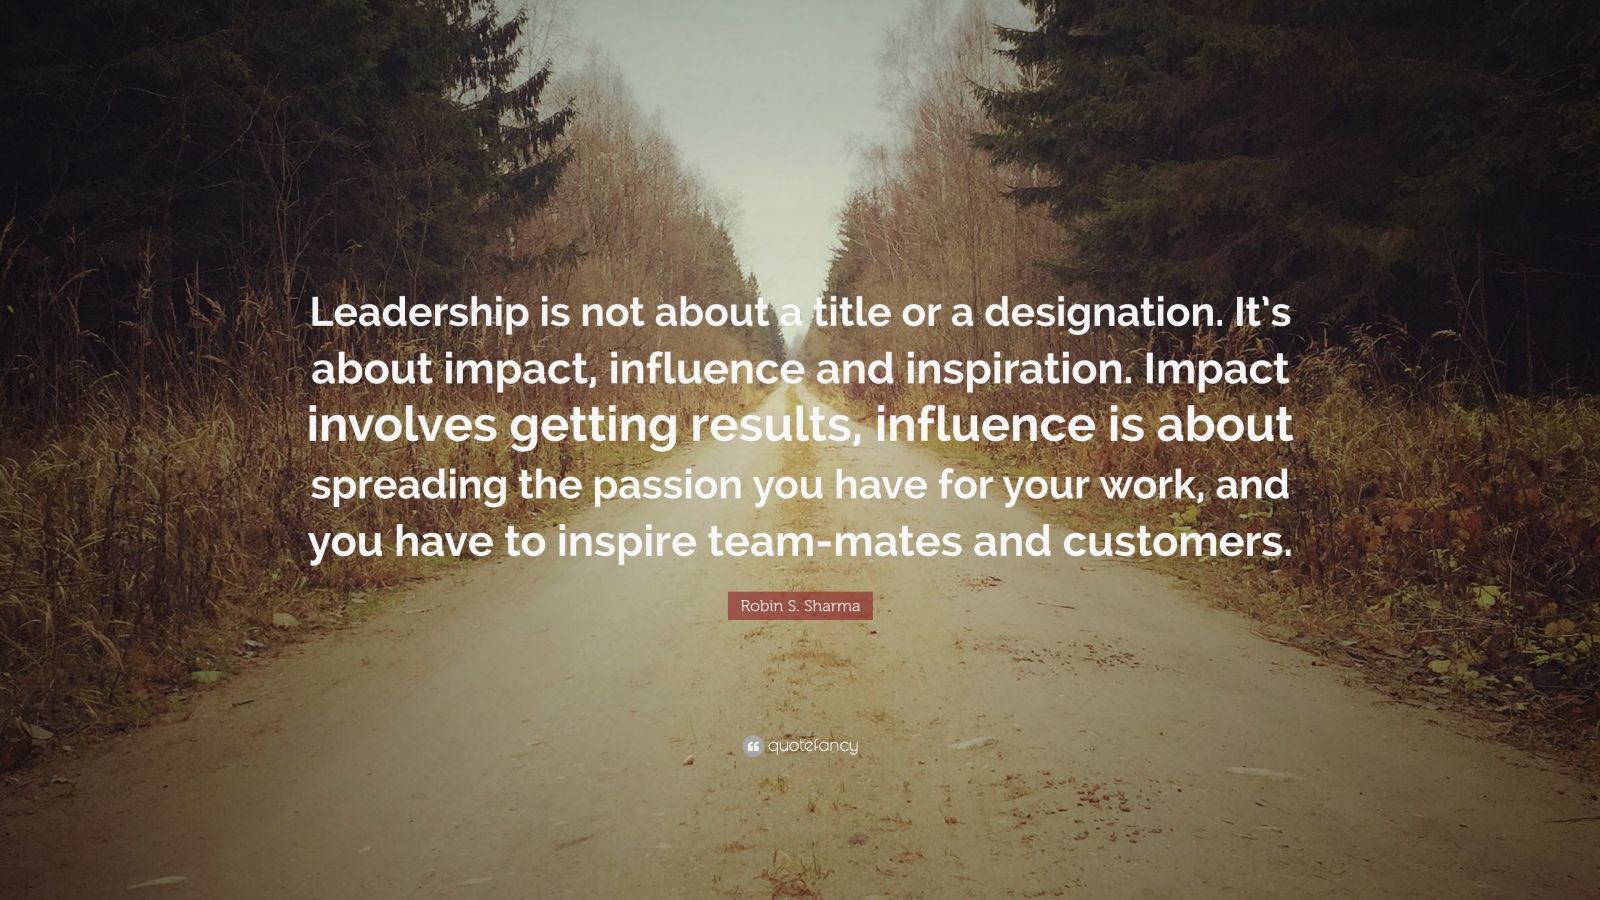 Robin S. Sharma Quote: “Leadership is not about a title or a